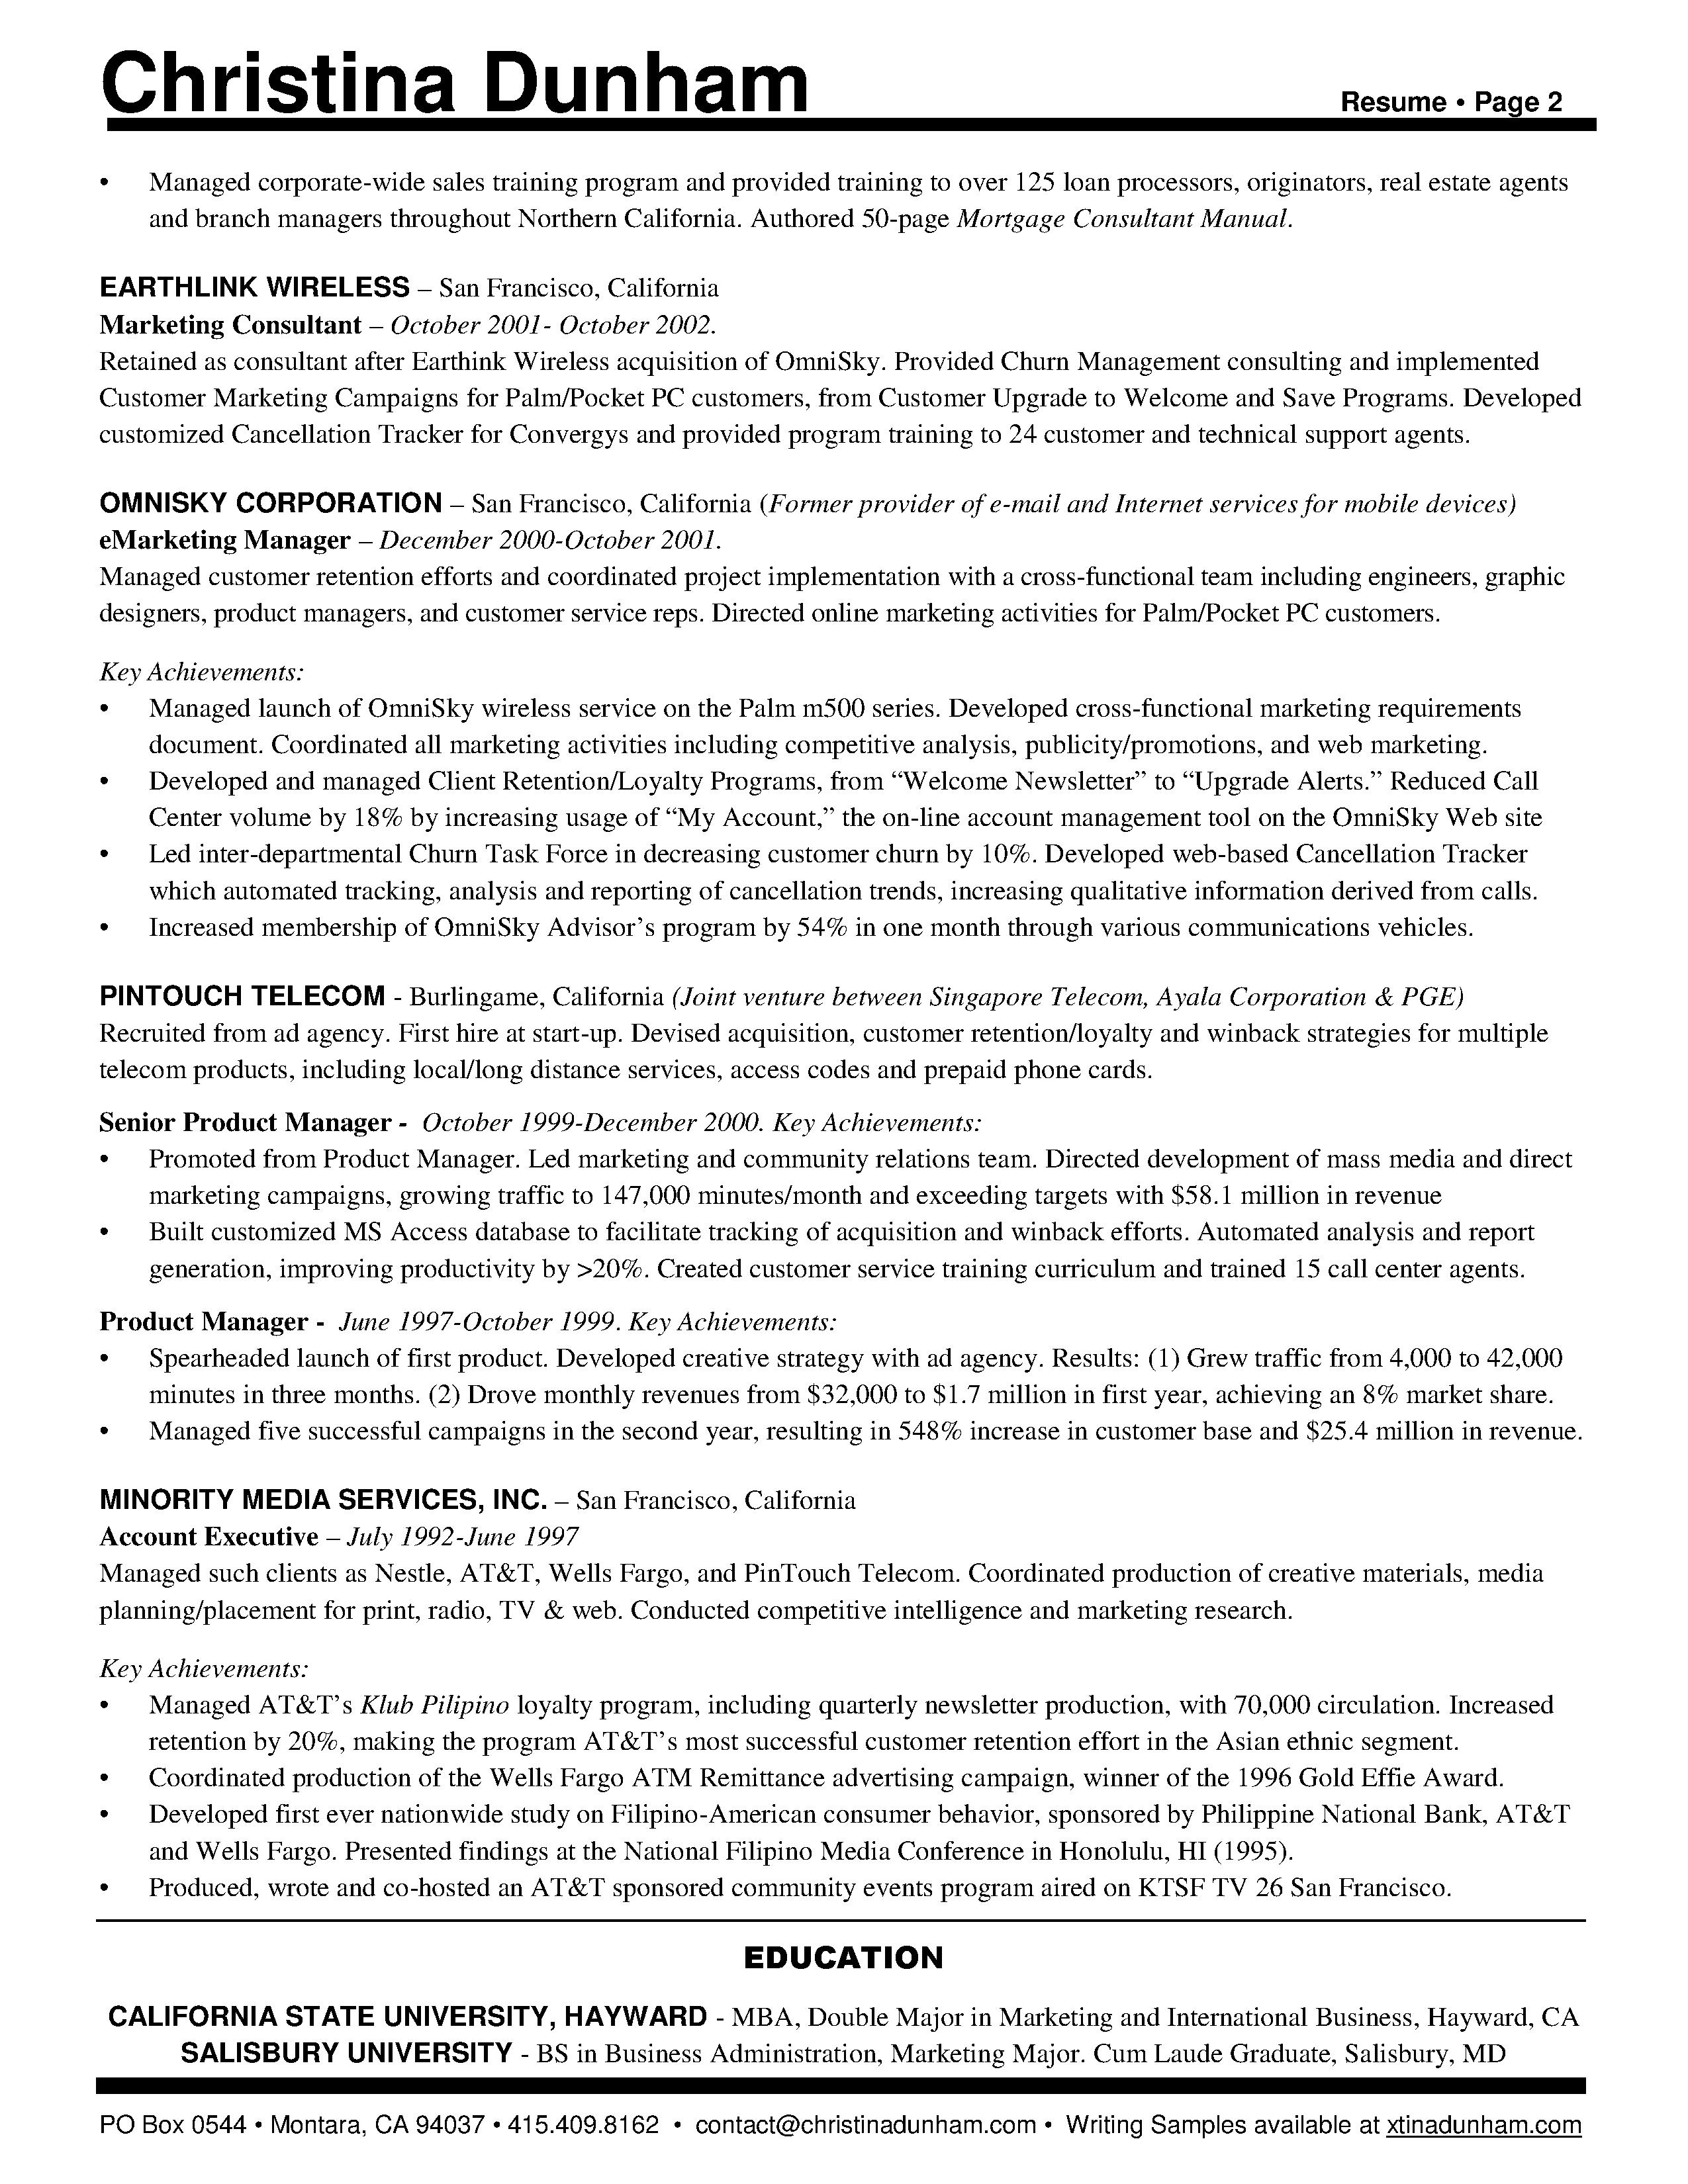 Resume 2 pages